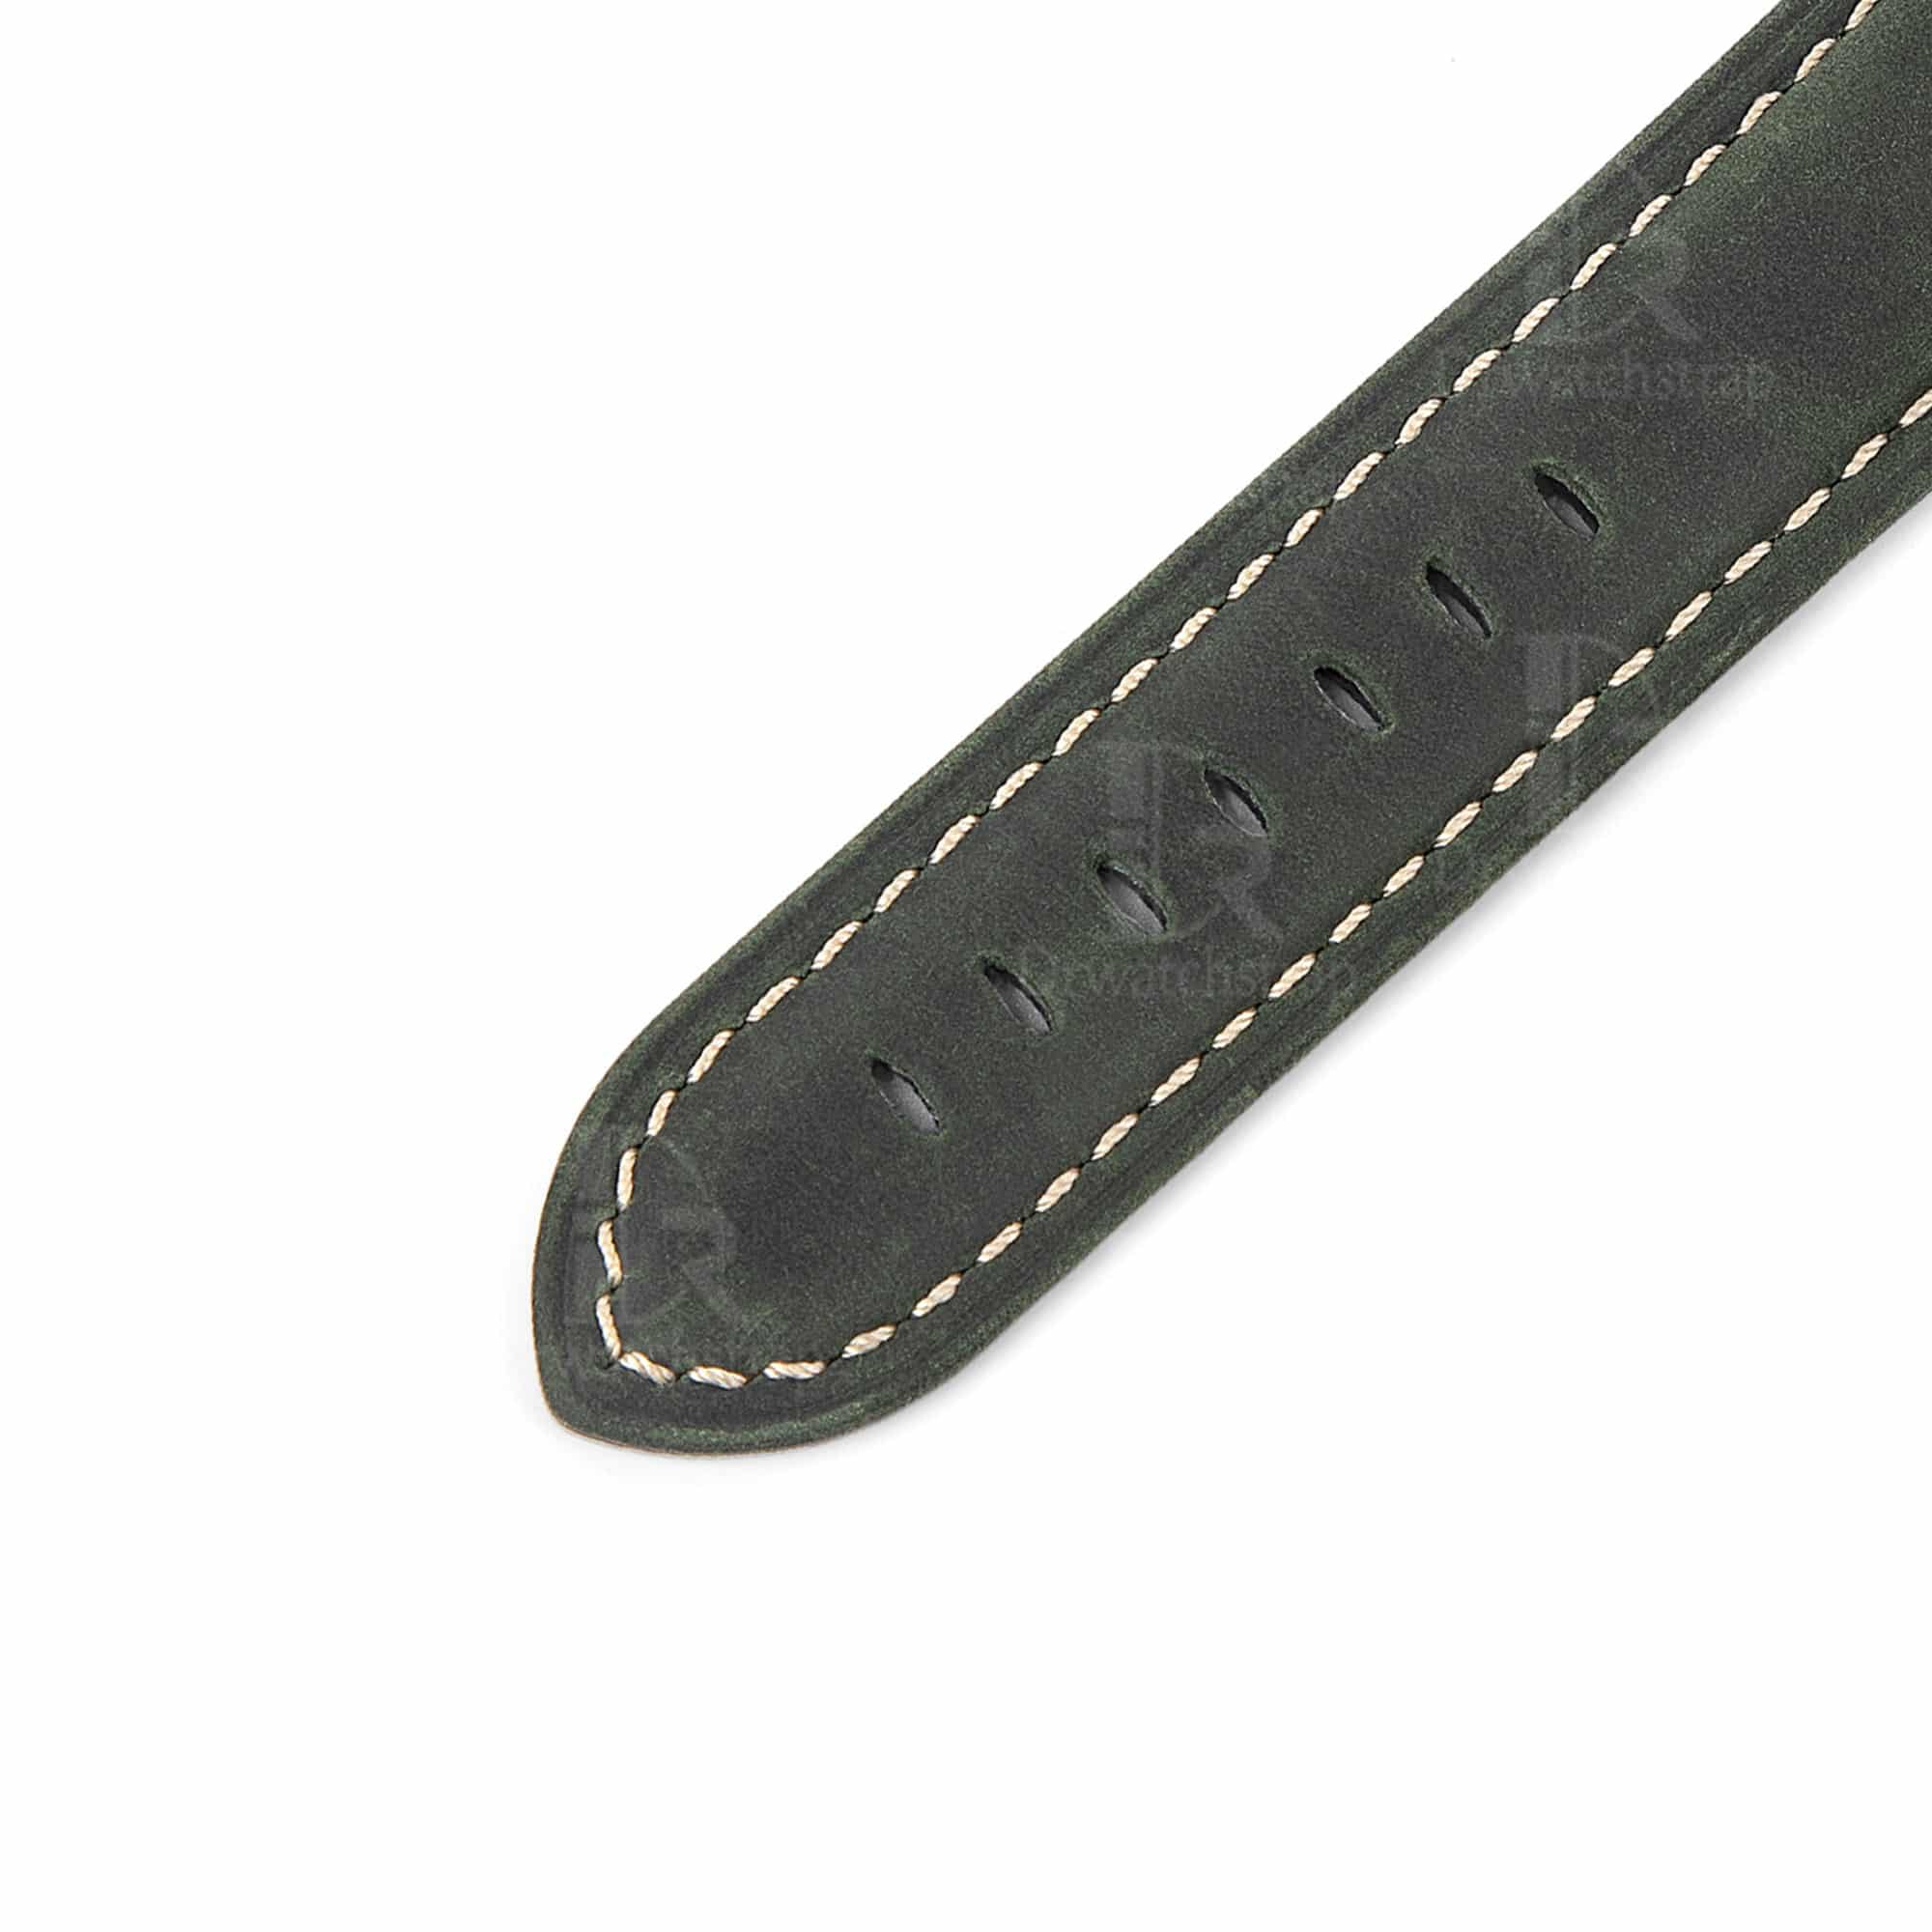 Custom aftermarket OEM best calfskin Oliver green Panerai leather watch straps & watch bands 22mm 24mm 26mm replacement for Panerai Luminor Marina, Radiomir, Submersible luxury watches - Shop the premium best calfskin material leather strap and watchband from Dr watchstrap at a low price